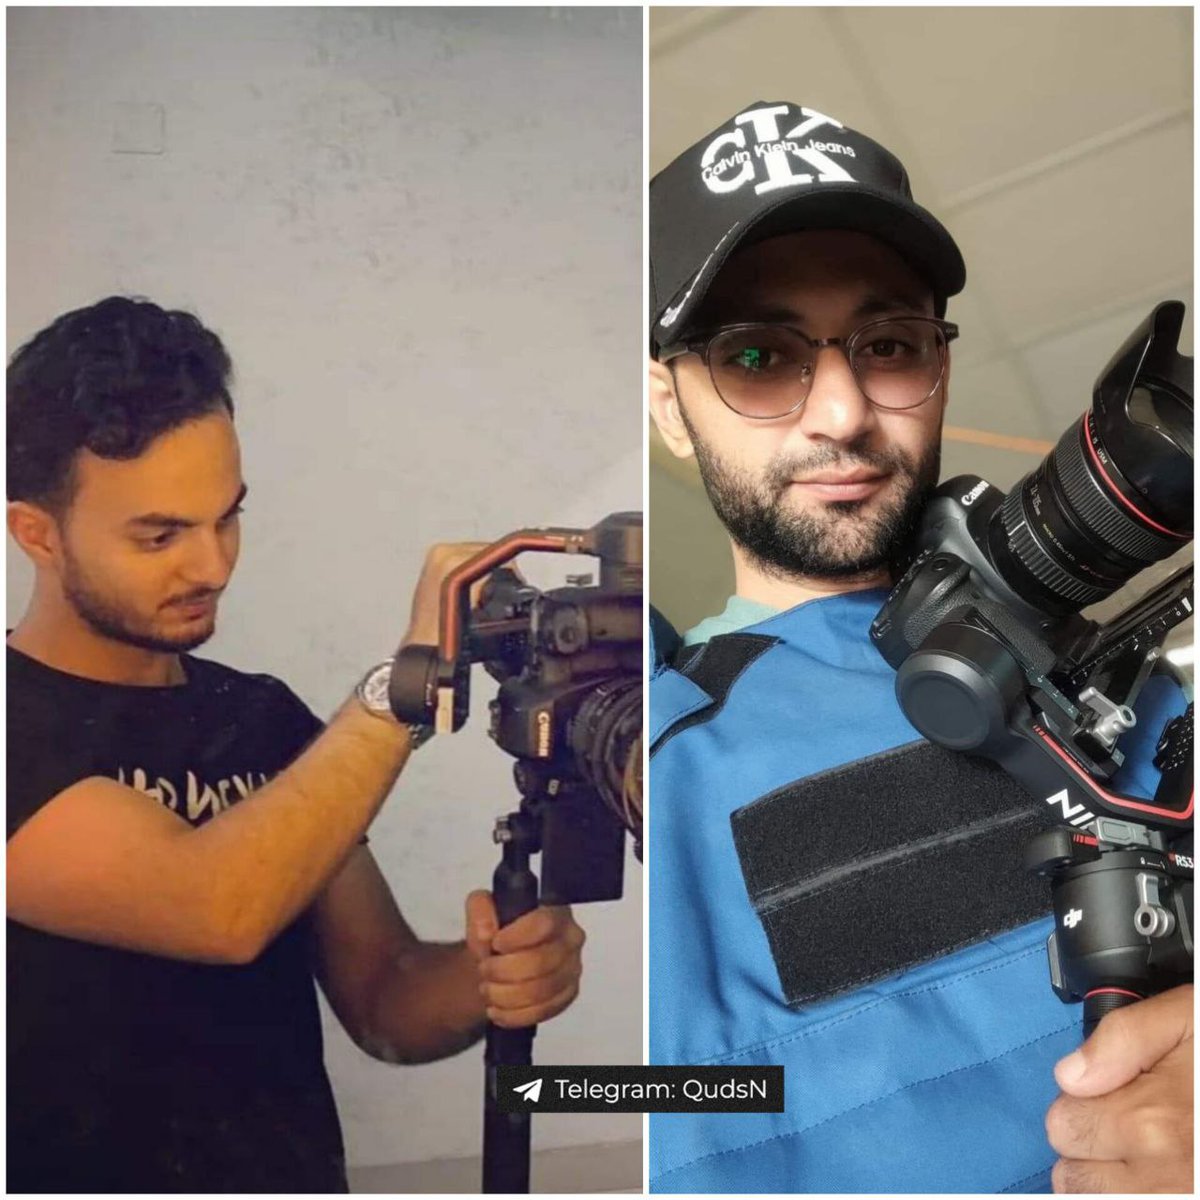 Yesterday, Israeli occupation forces murdered journalists Ayman and Ibrahim Al-Gharbawi while they were covering the Israeli military attack on Hamad area northwest of Khan Yunis. This adds to the toll of journalists killed by Israel in less than 6 months to 140 journalists.